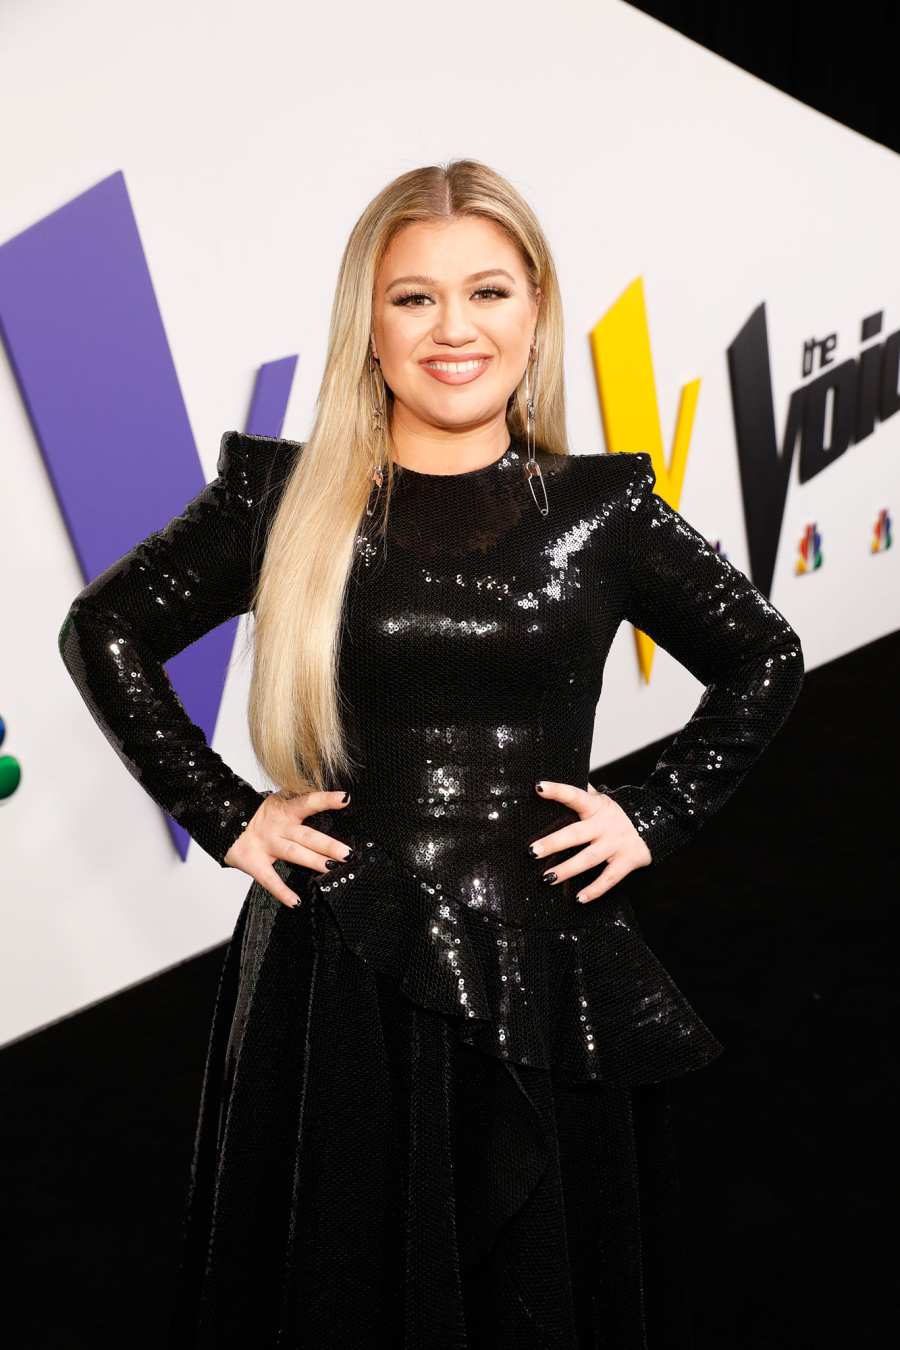 The Other Way a Slim, Beaming Kelly Clarkson Won ‘The Voice’ Last Night